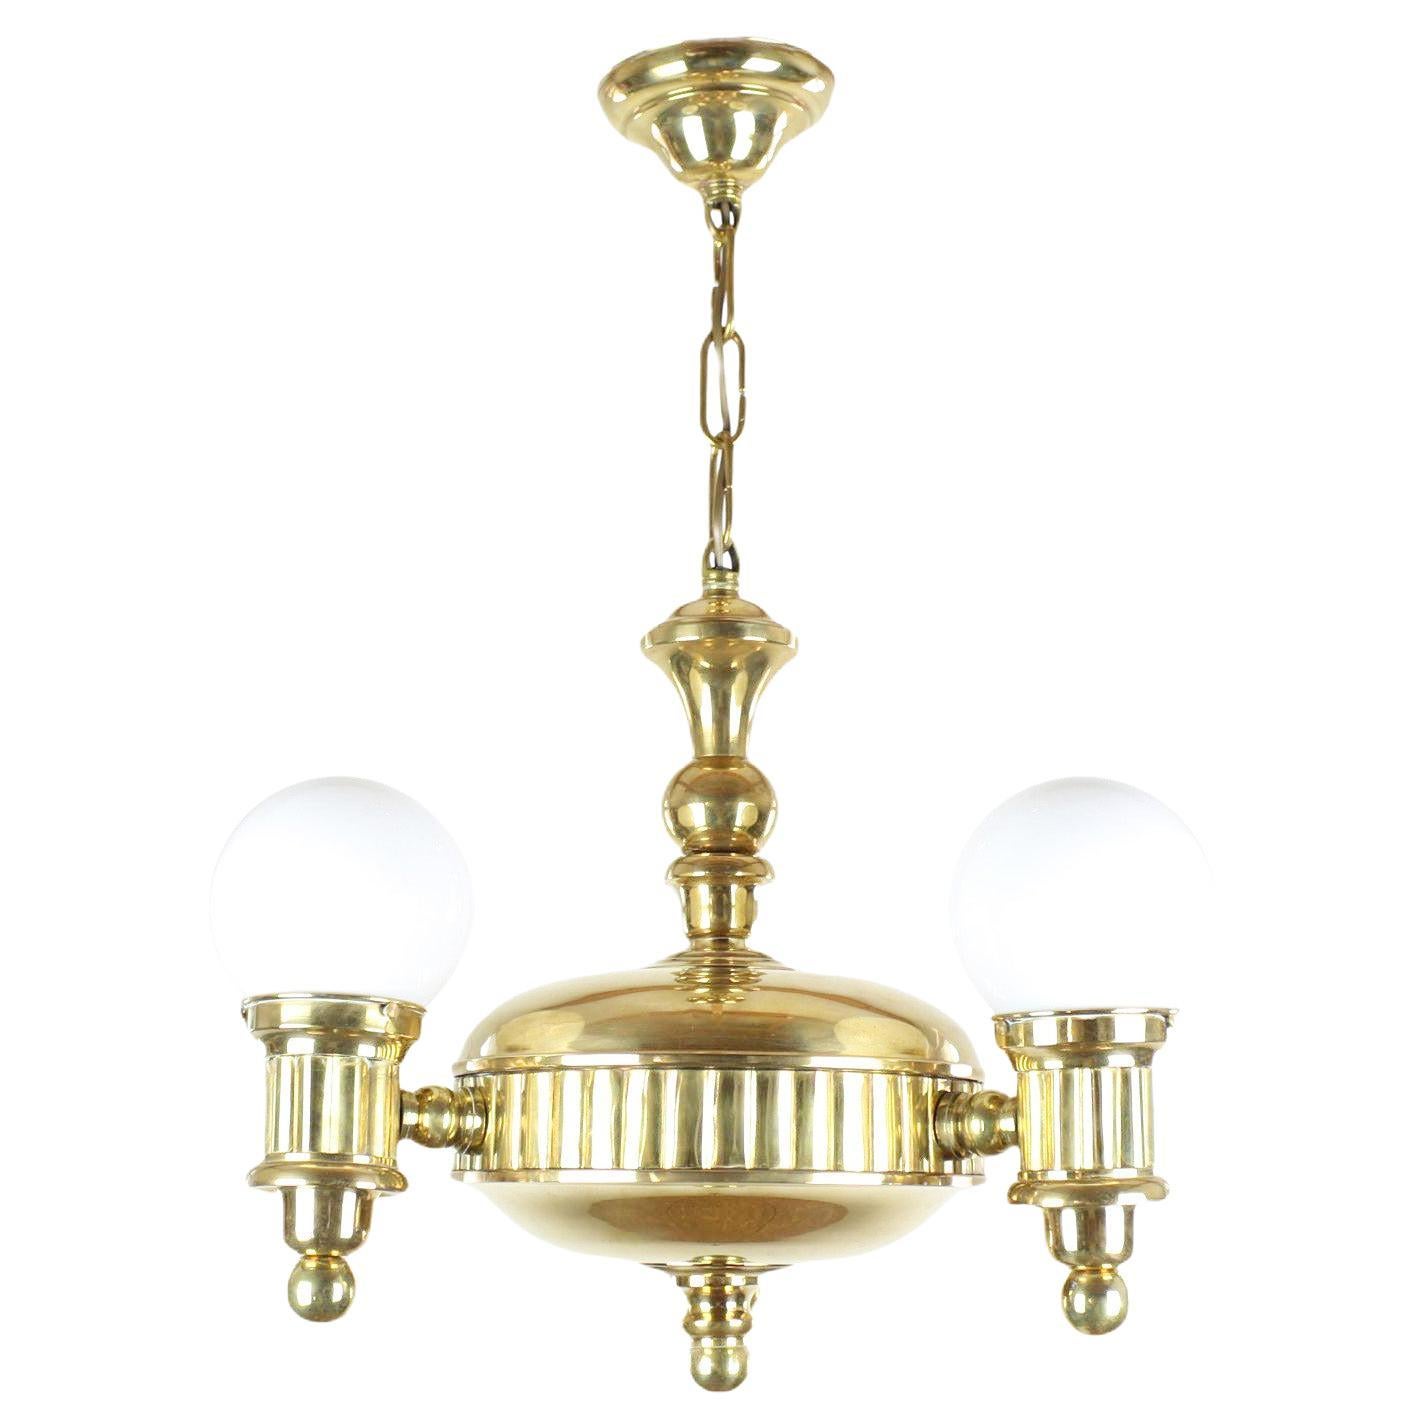 Exclusive Art Deco Chandelier with Swivel Arms 'Three-Arm Design'